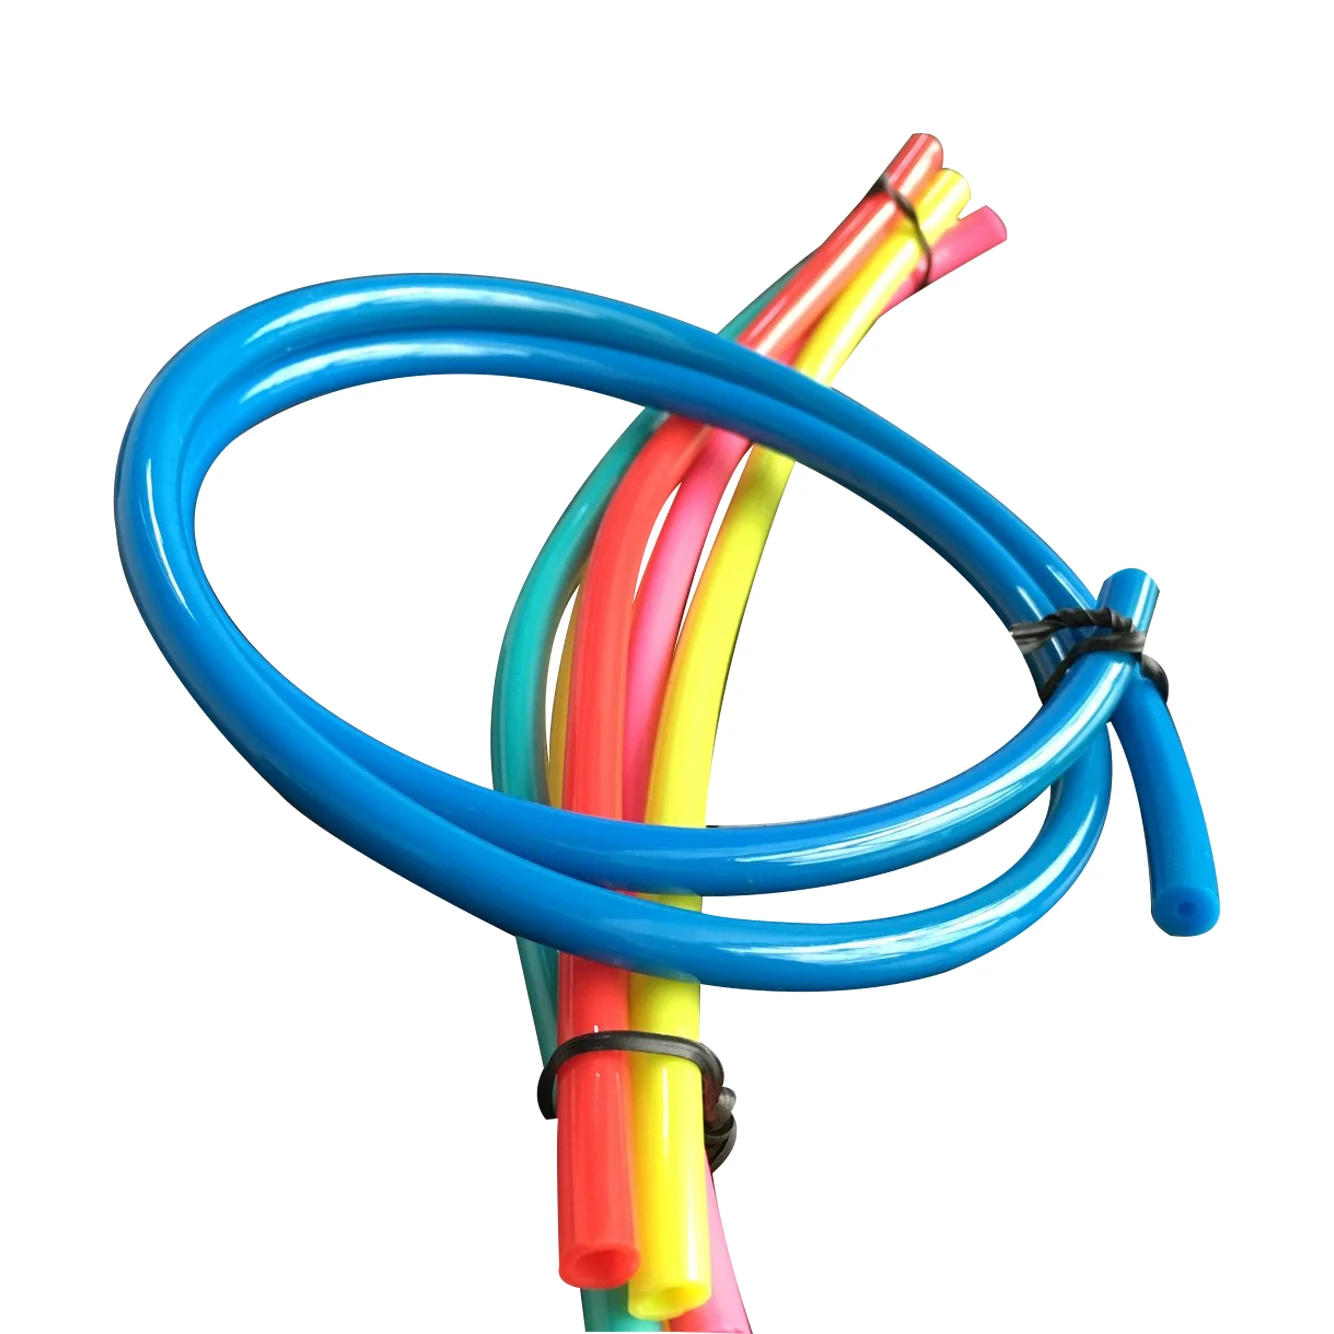 Oem Support Environmentally Friendly Silicone Hose Food Grade Pvc Pipe Pu Tpu Colored Plastic Tubing For Toy (1600479611332)